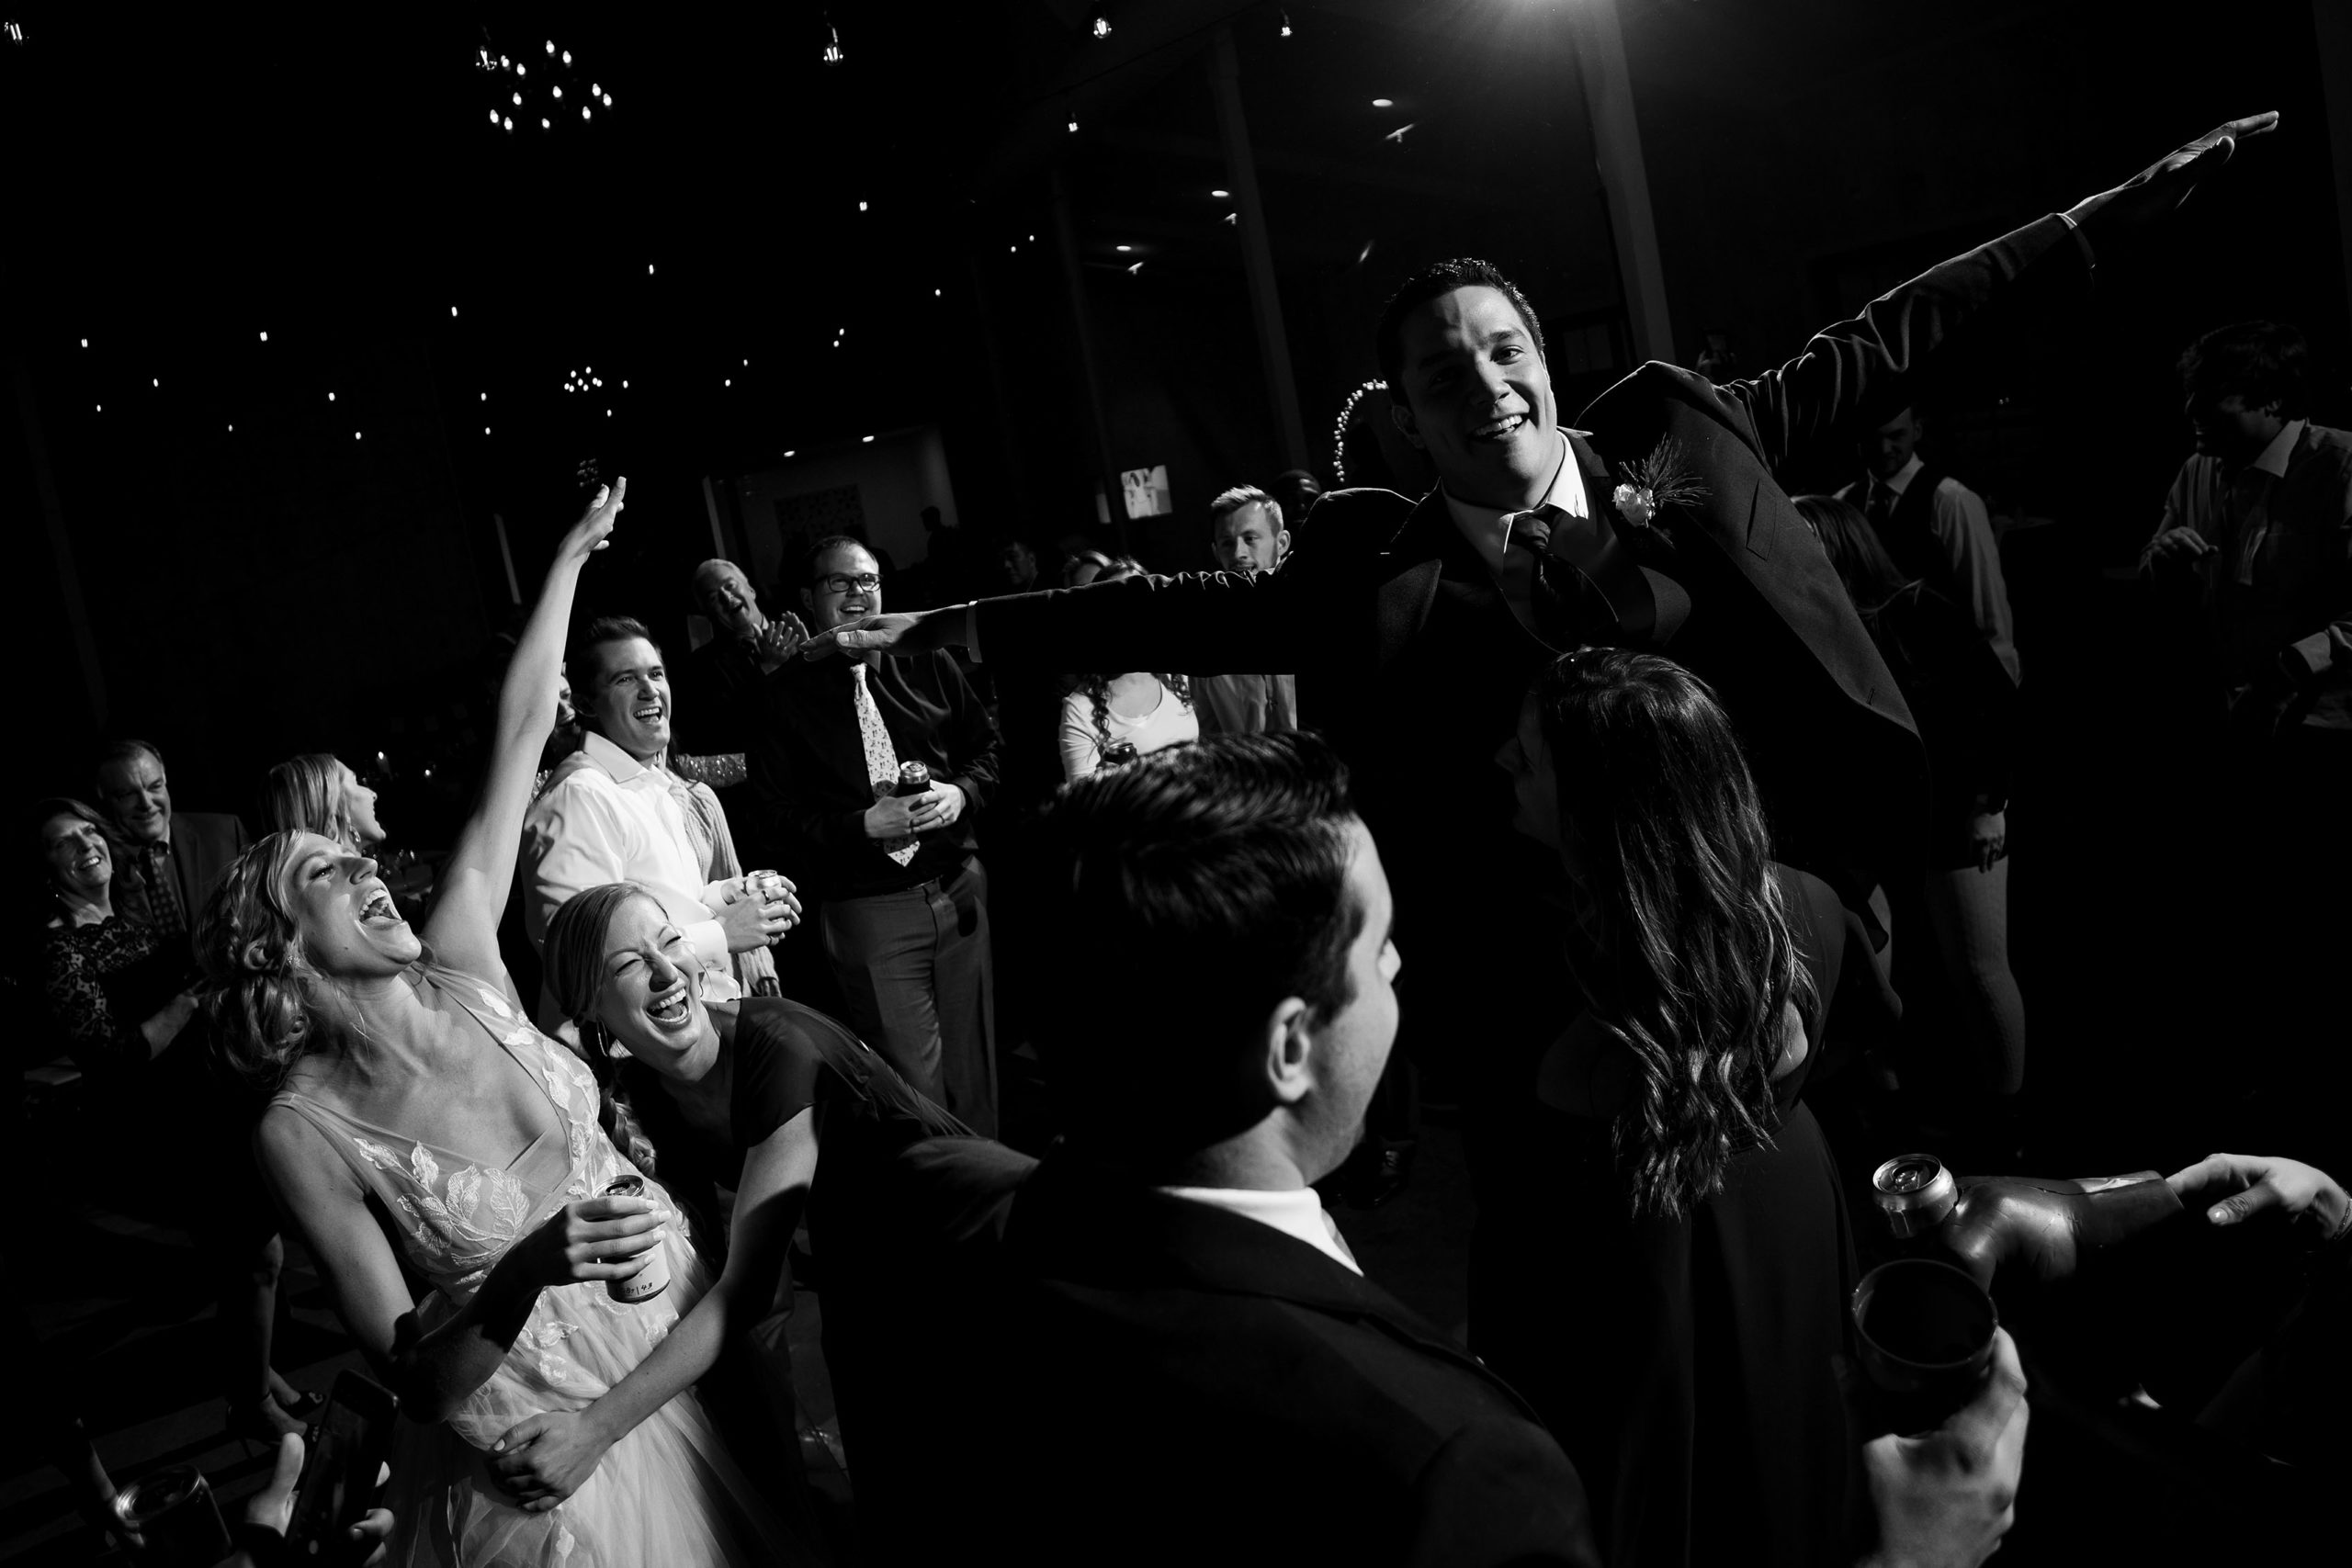 Guests dance during a wedding reception at Woodlands